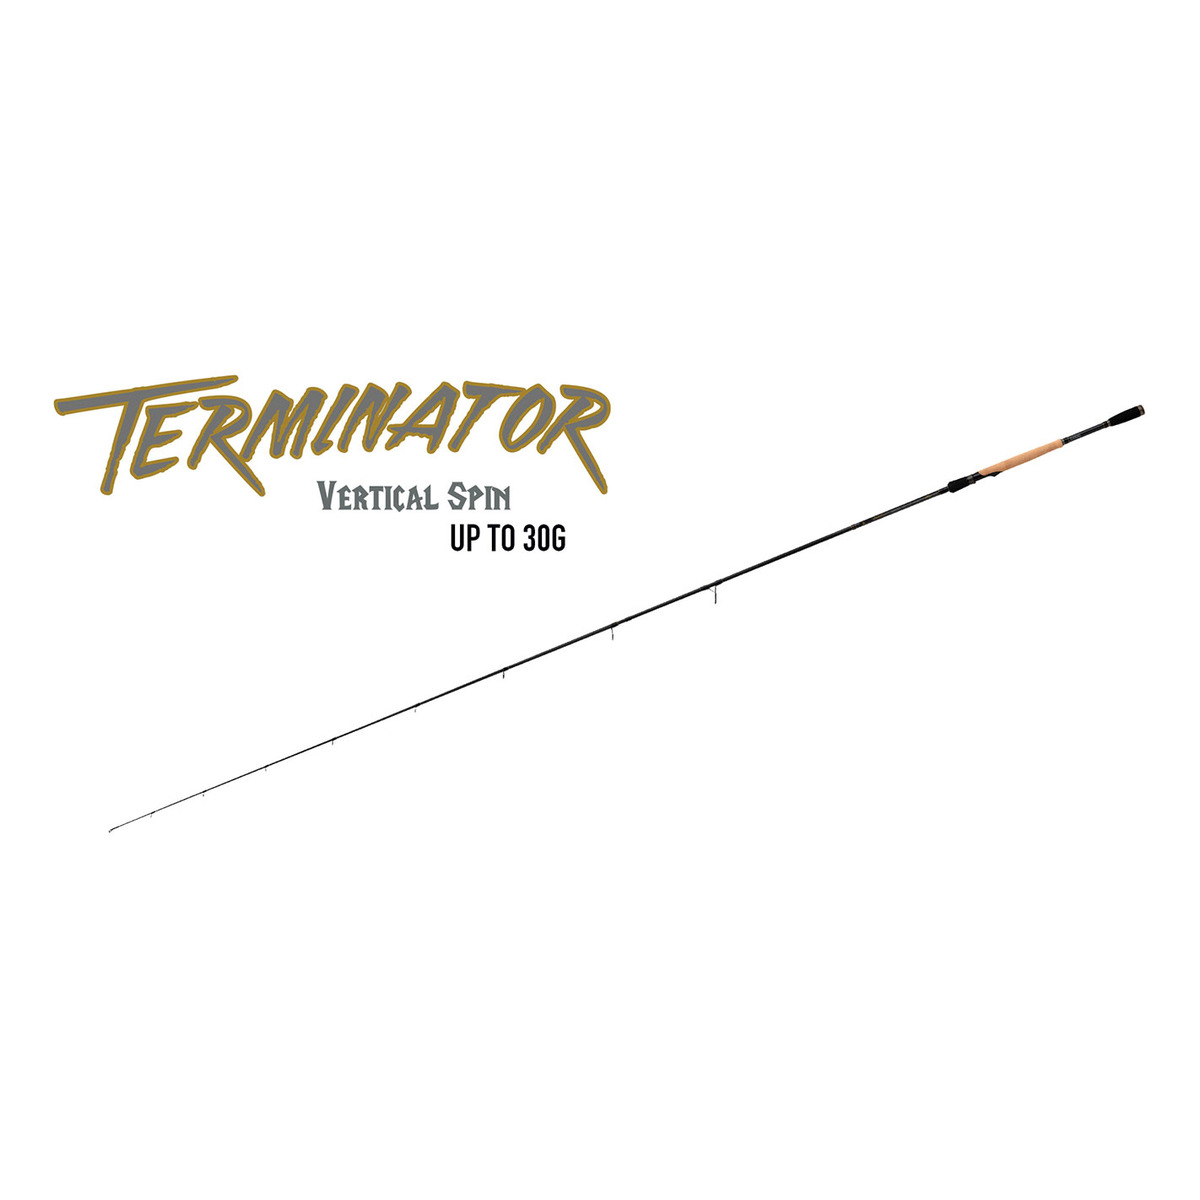 Fox Rage Terminator Vertical Spin Rod Up To 30g - 180 cm Up To 30g